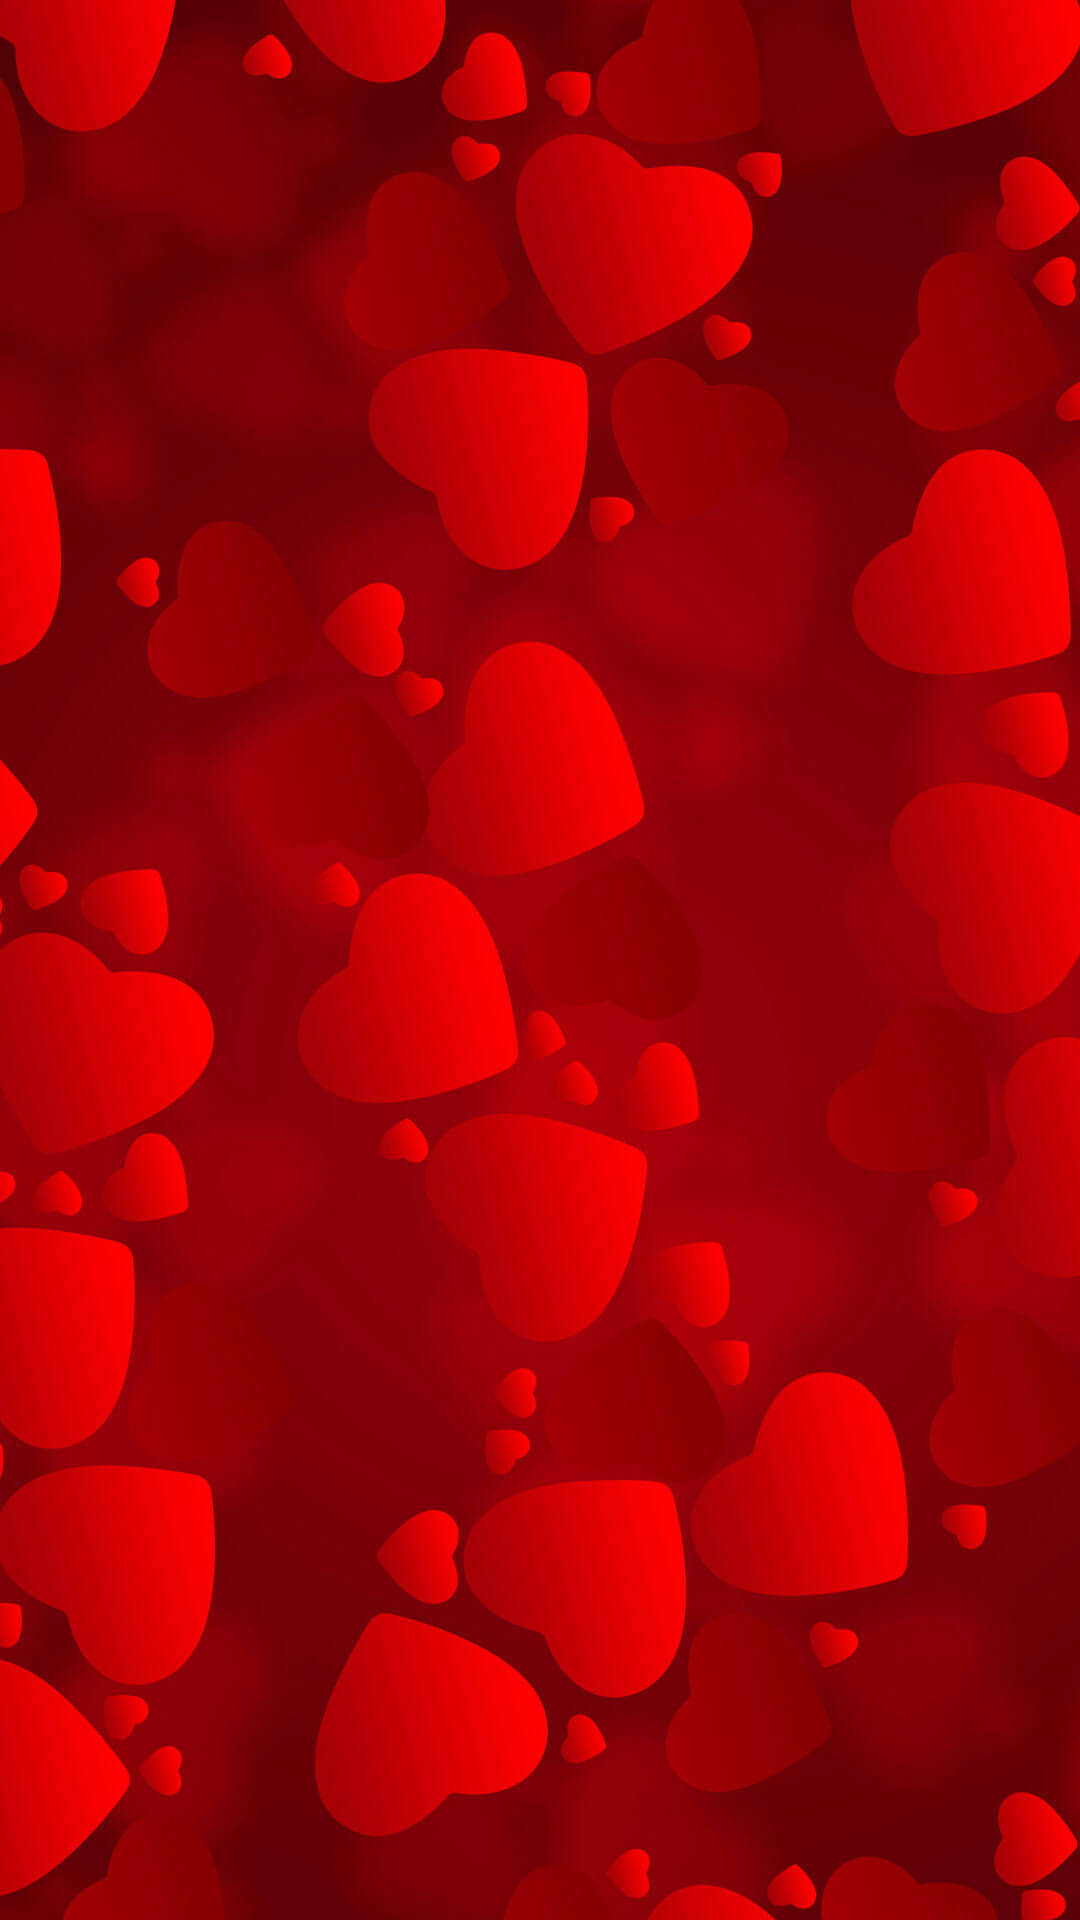 Red Hearts On A Red Background Wallpaper